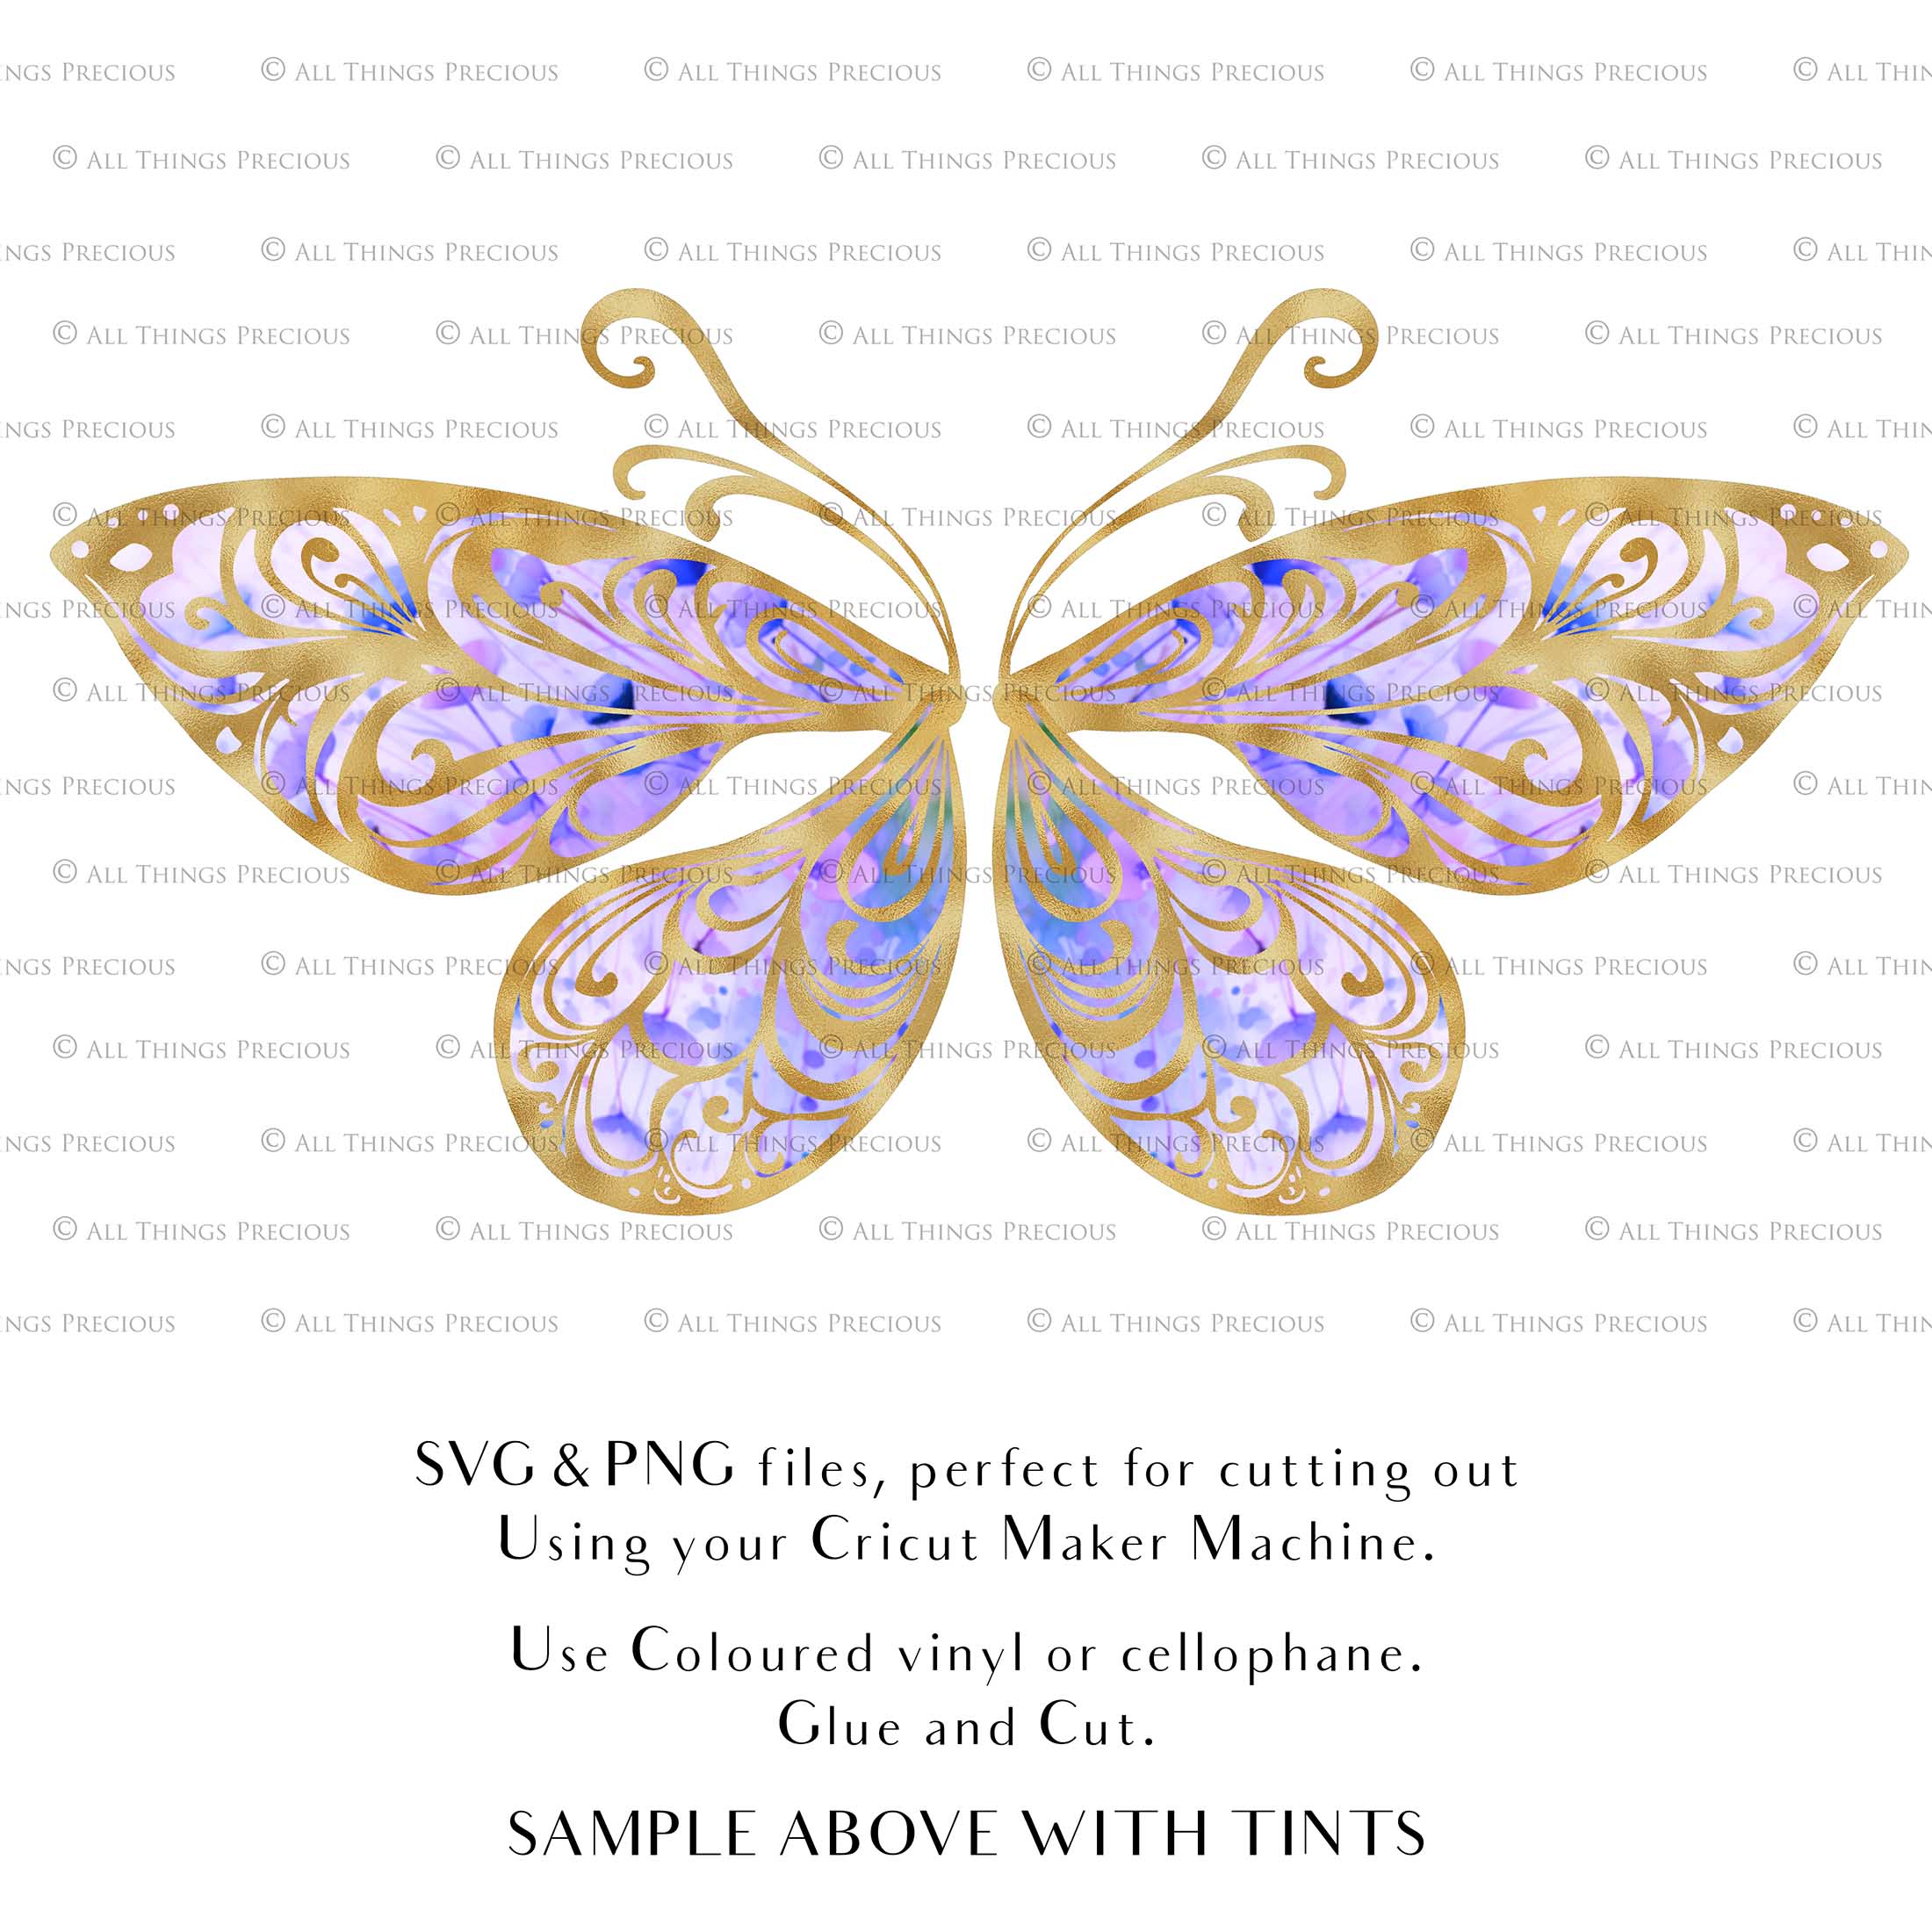 SVG & PNG Fairy Wing files for Cricut or Silhouette Cameo Cutting Machine. To create wearable fairy wings, in adult or children sizes. Use this graphic design for Halloween Costumes, Fantasy or Cosplay or photography. Use as prints in weddings, engagements or baby shower invitations. for you to cut and assemble.